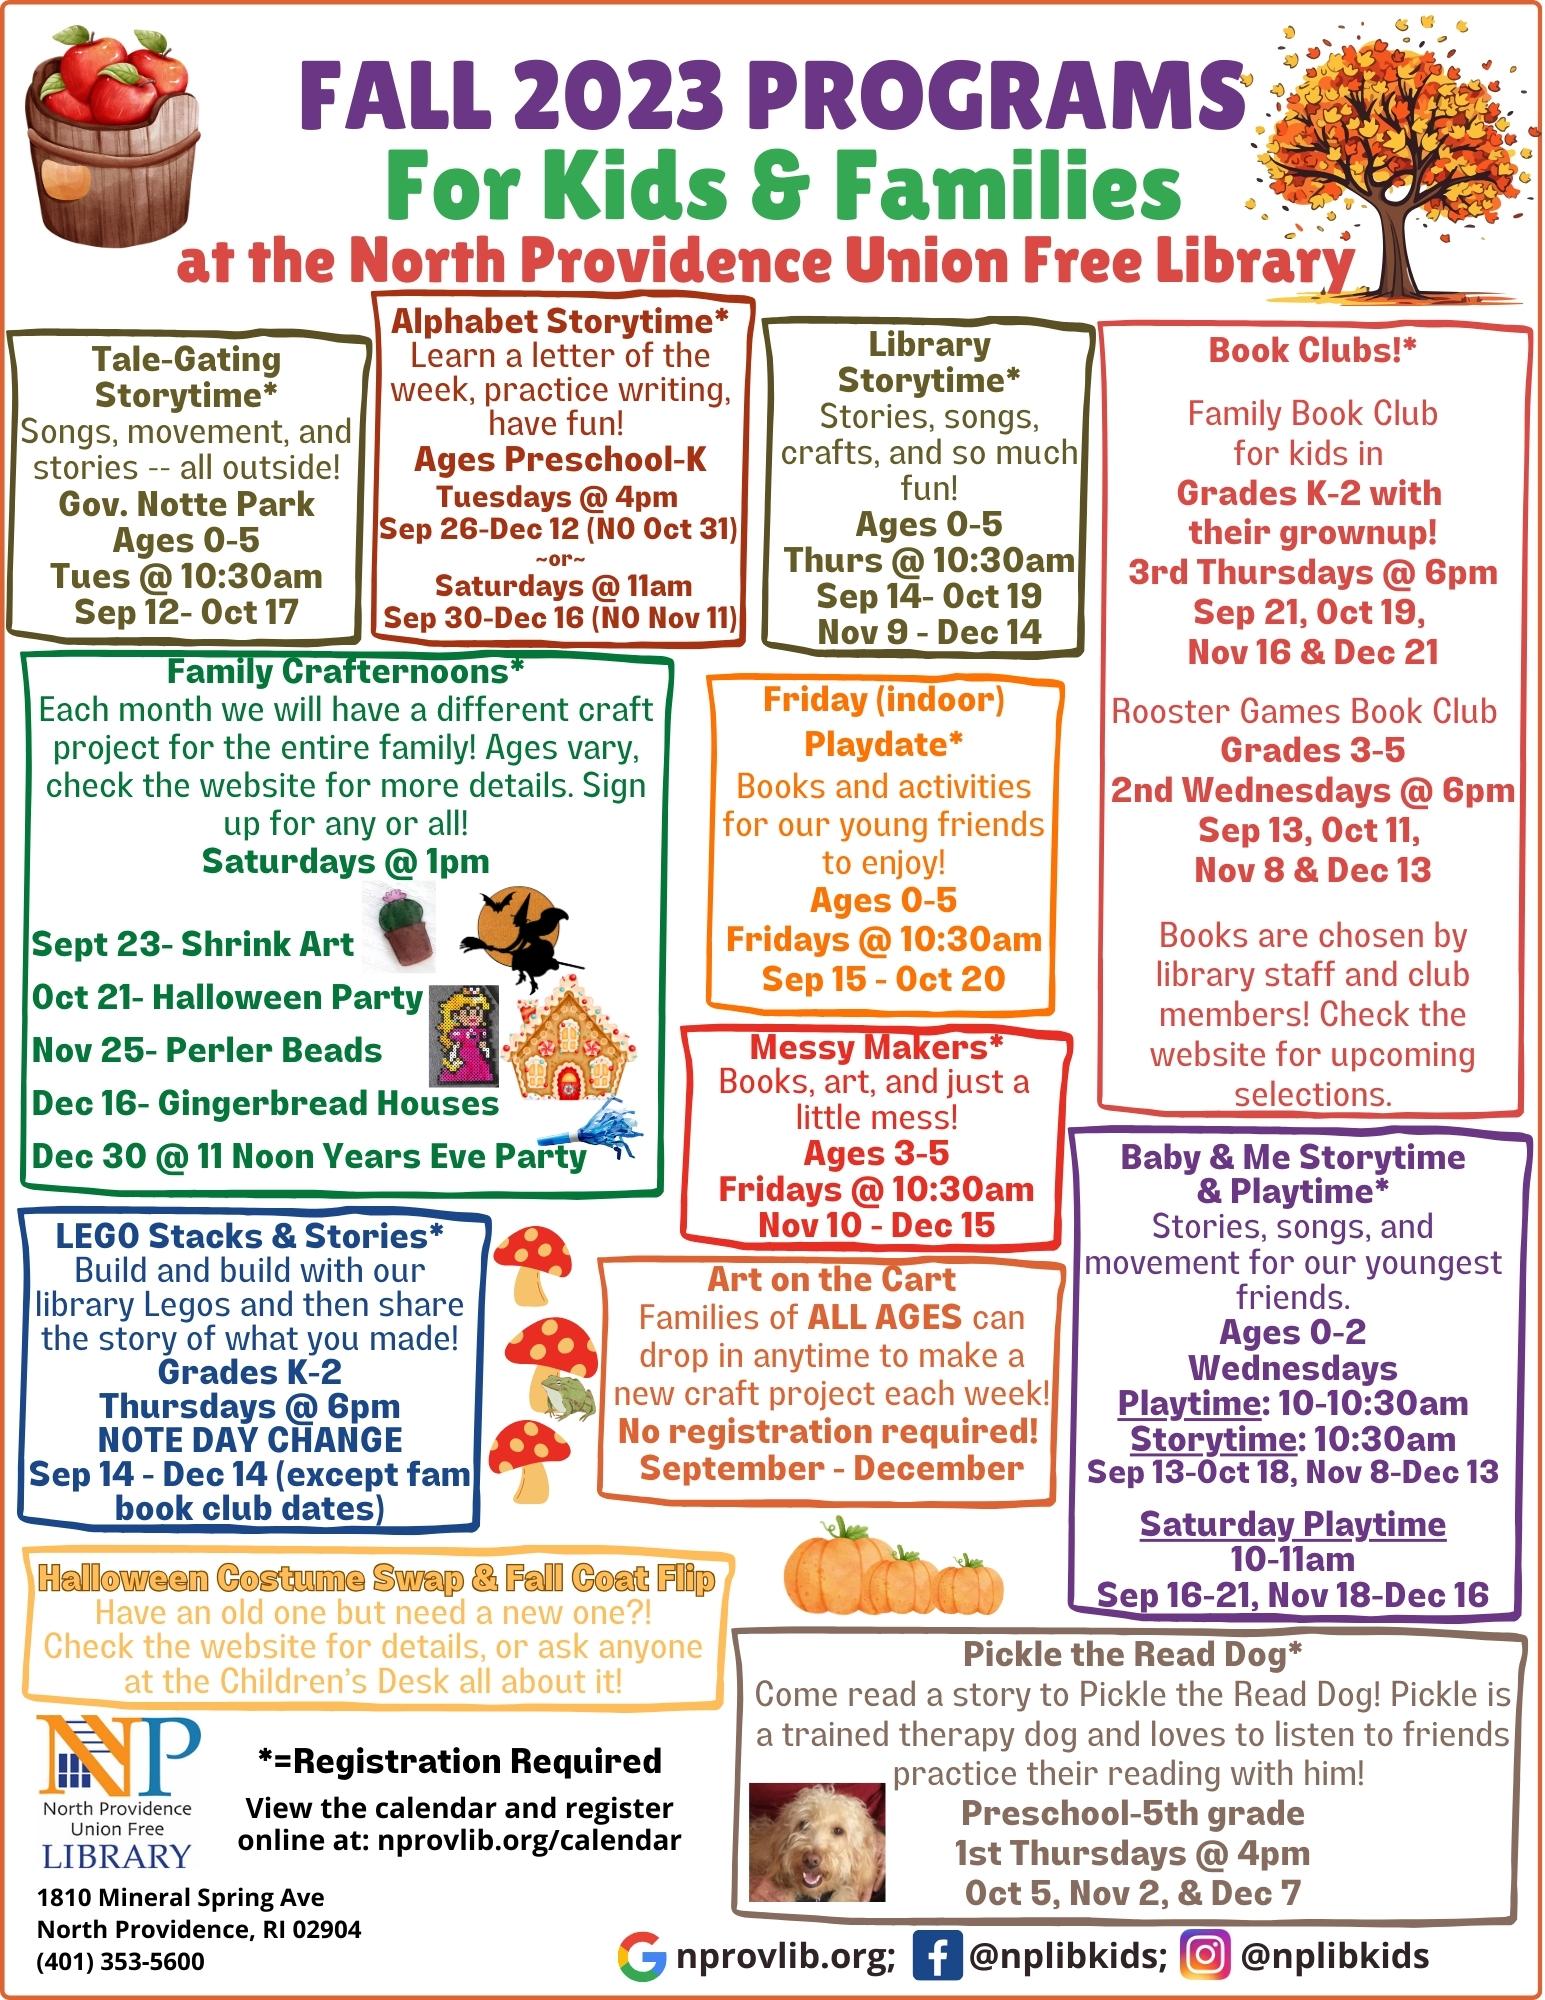 Flyer listing all of the programs for fall of 2023 for kids and families.